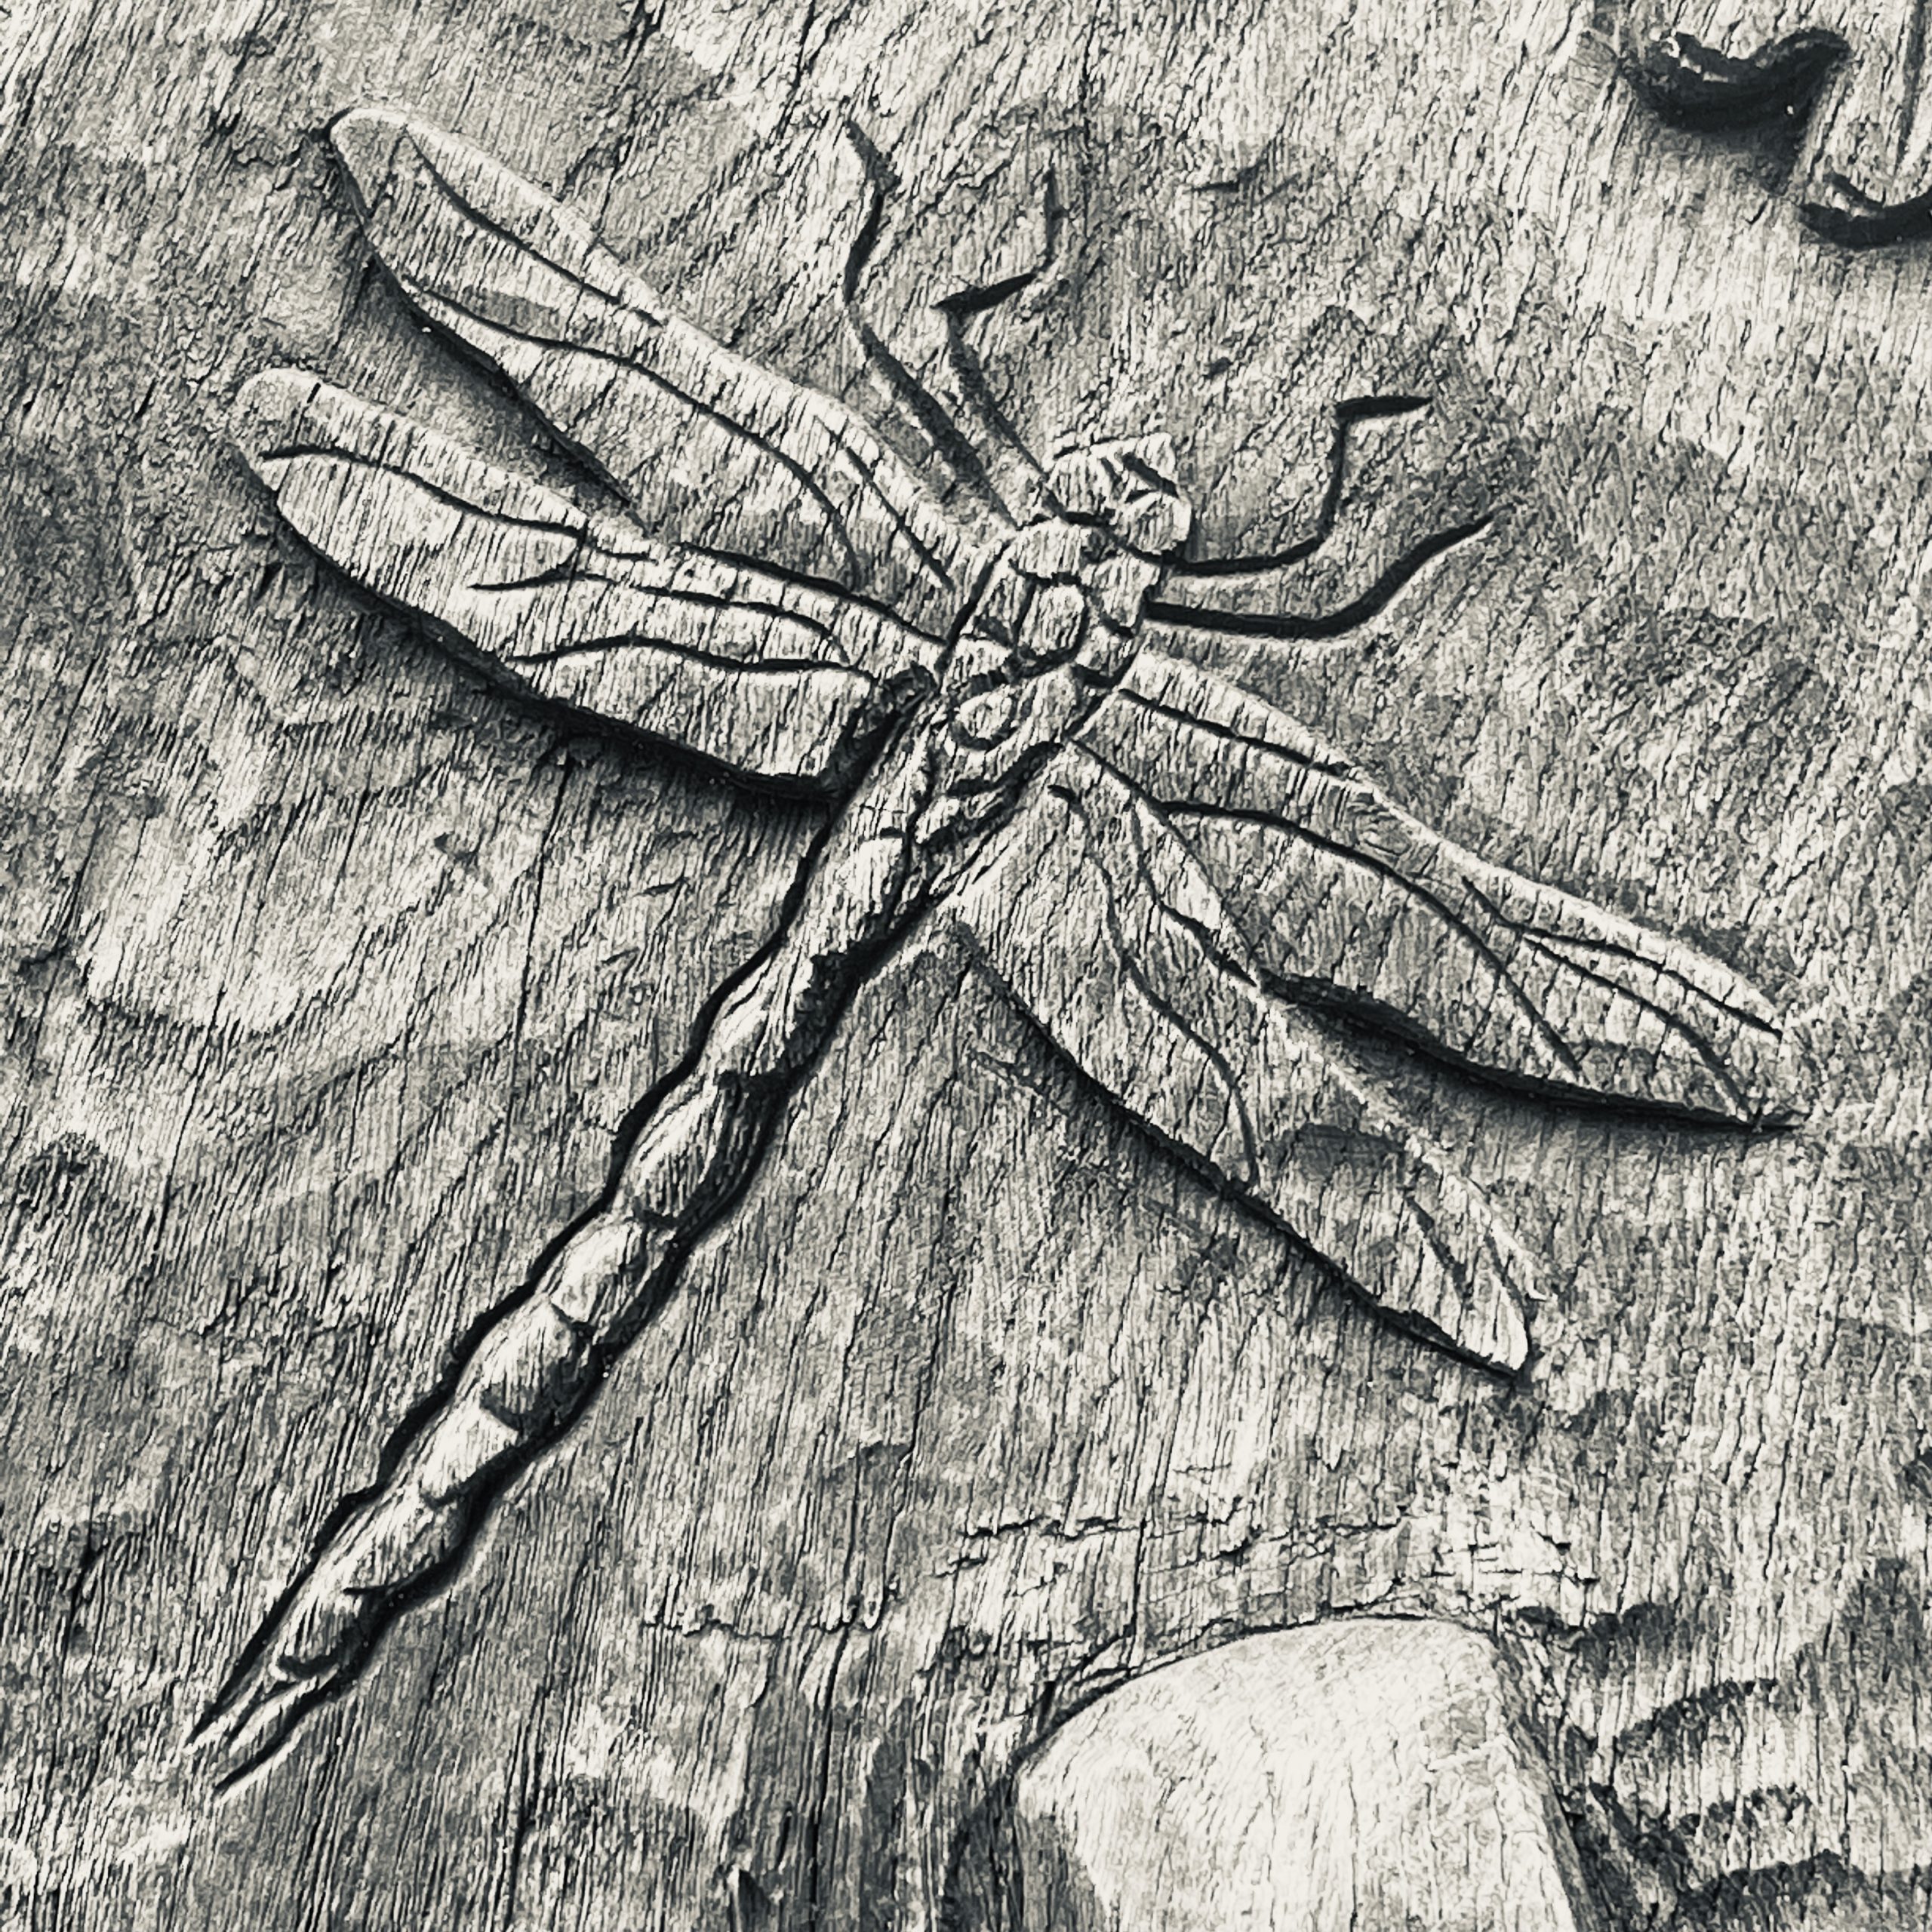 Dragonfly carved in a seat in Branston